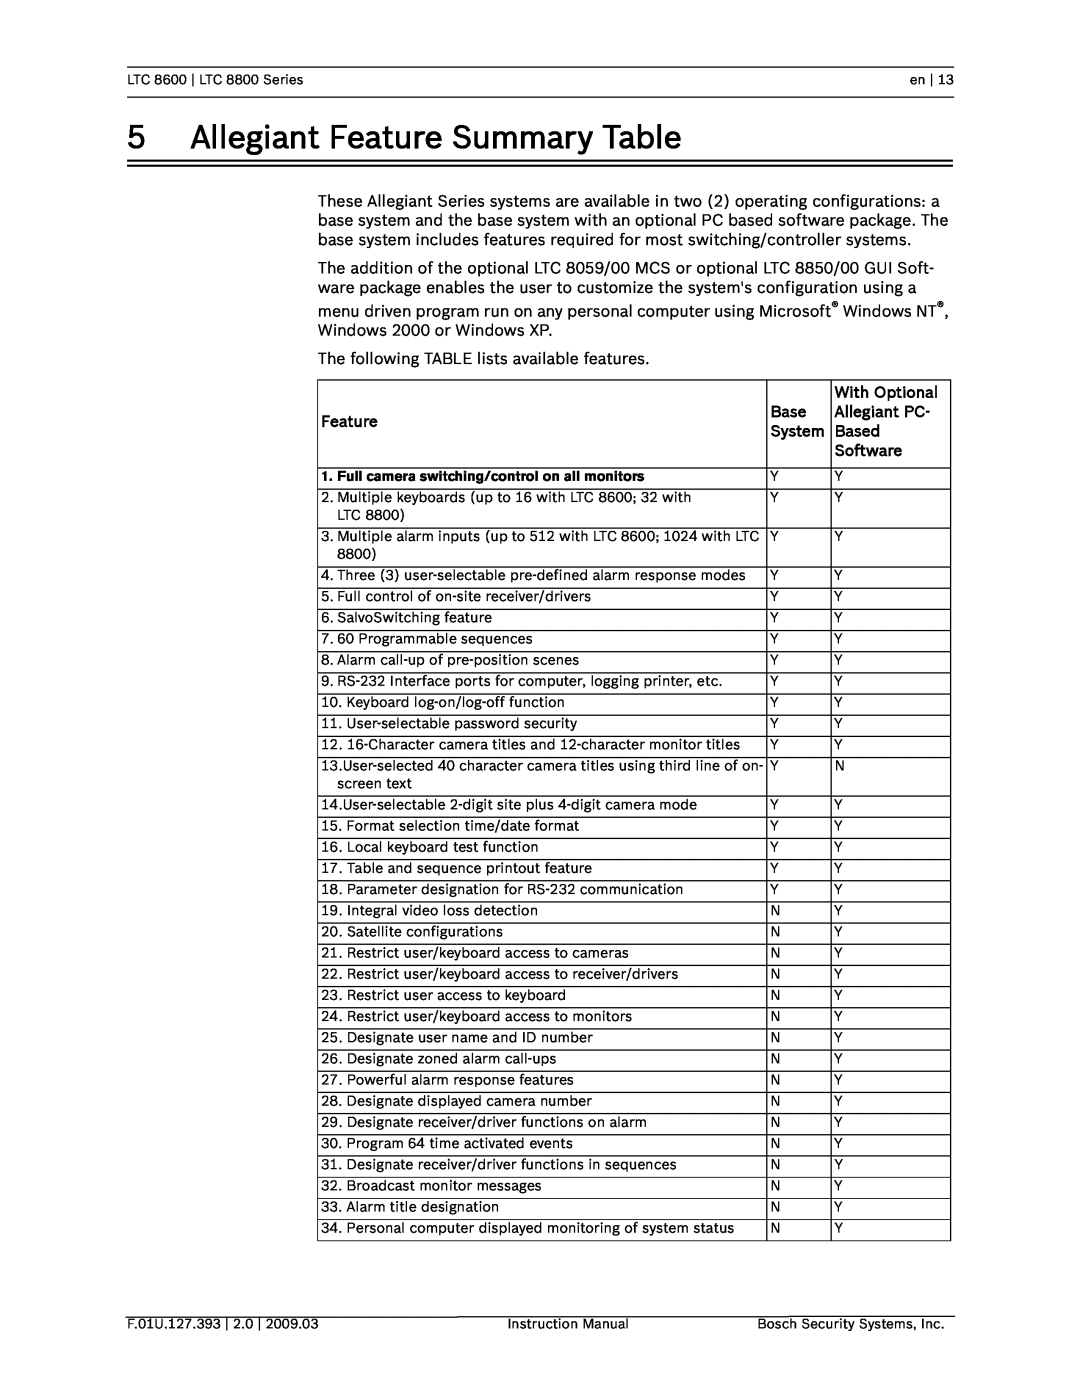 Bosch Appliances LTC 8800 Allegiant Feature Summary Table, With Optional, Allegiant PC, System, Based, Software 